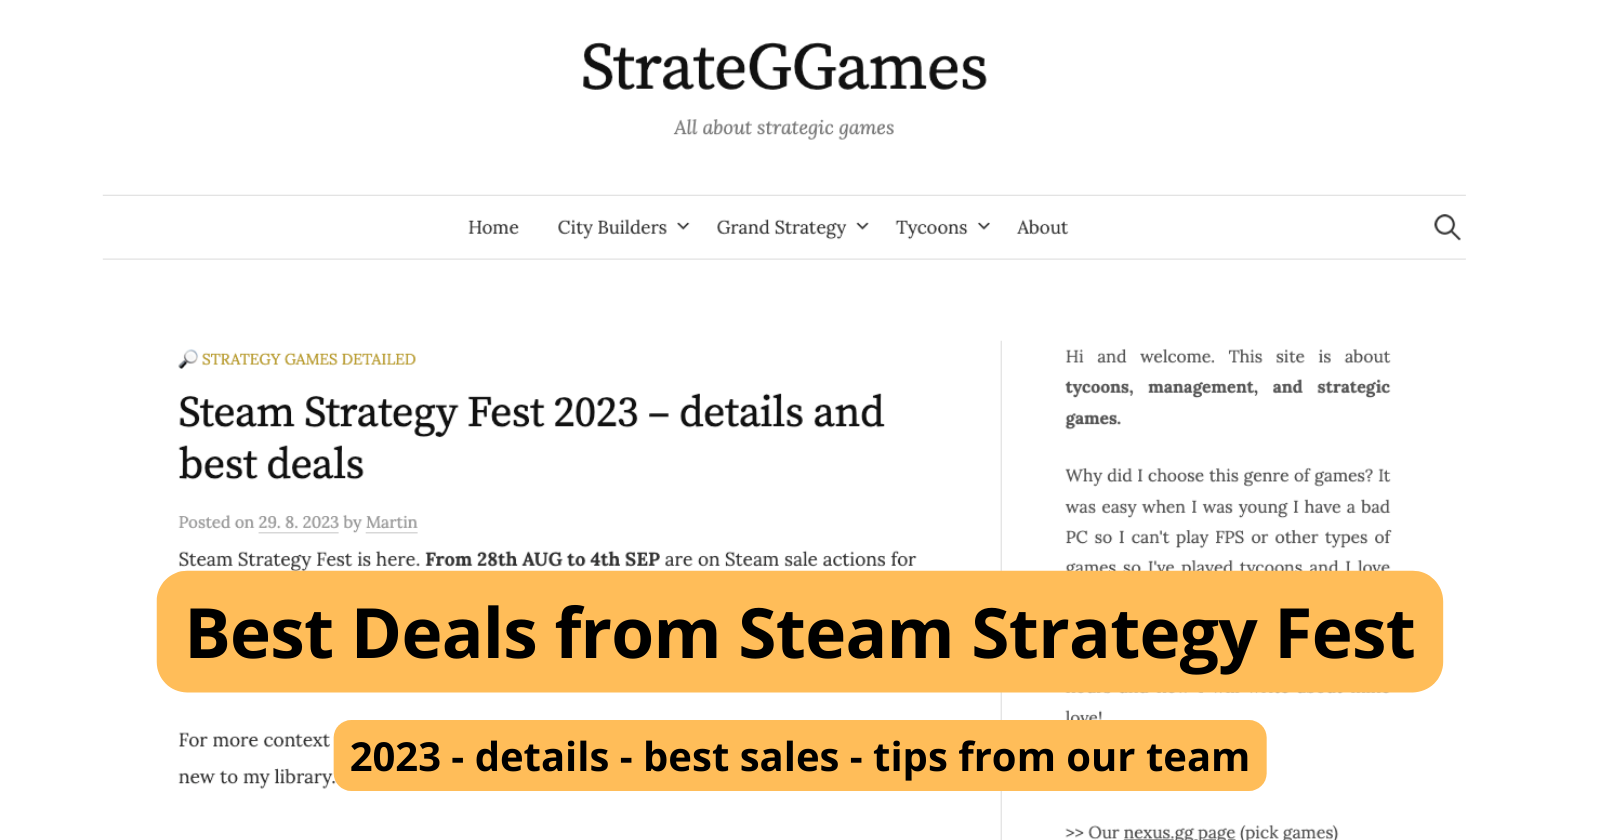 Steam Strategy Fest 2023 details and best deals StrateGGames